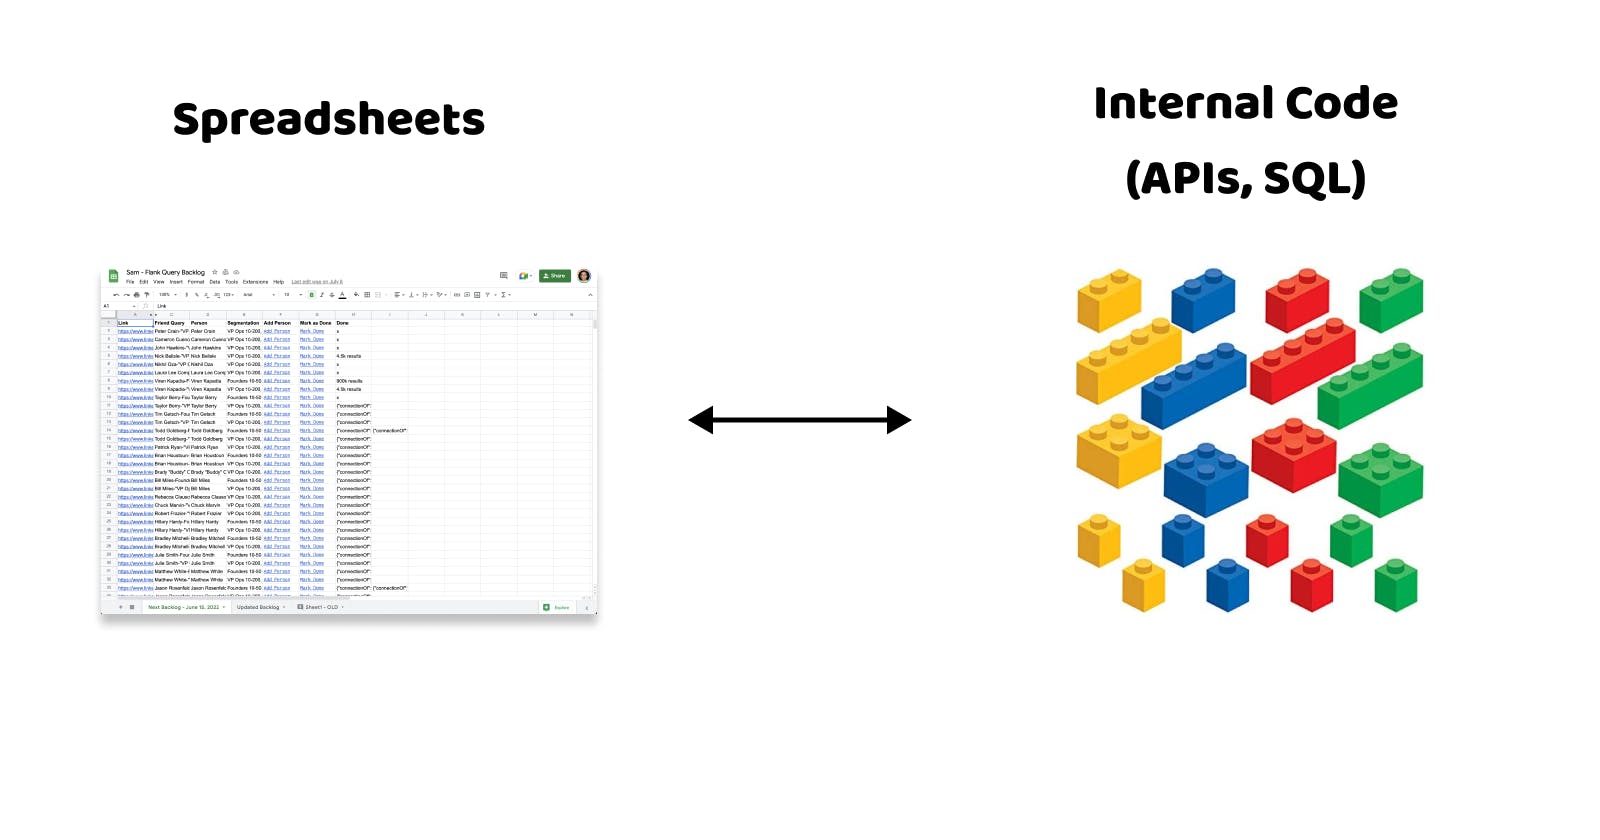 Connecting Spreadsheets with Internal Code (APIs, SQL)